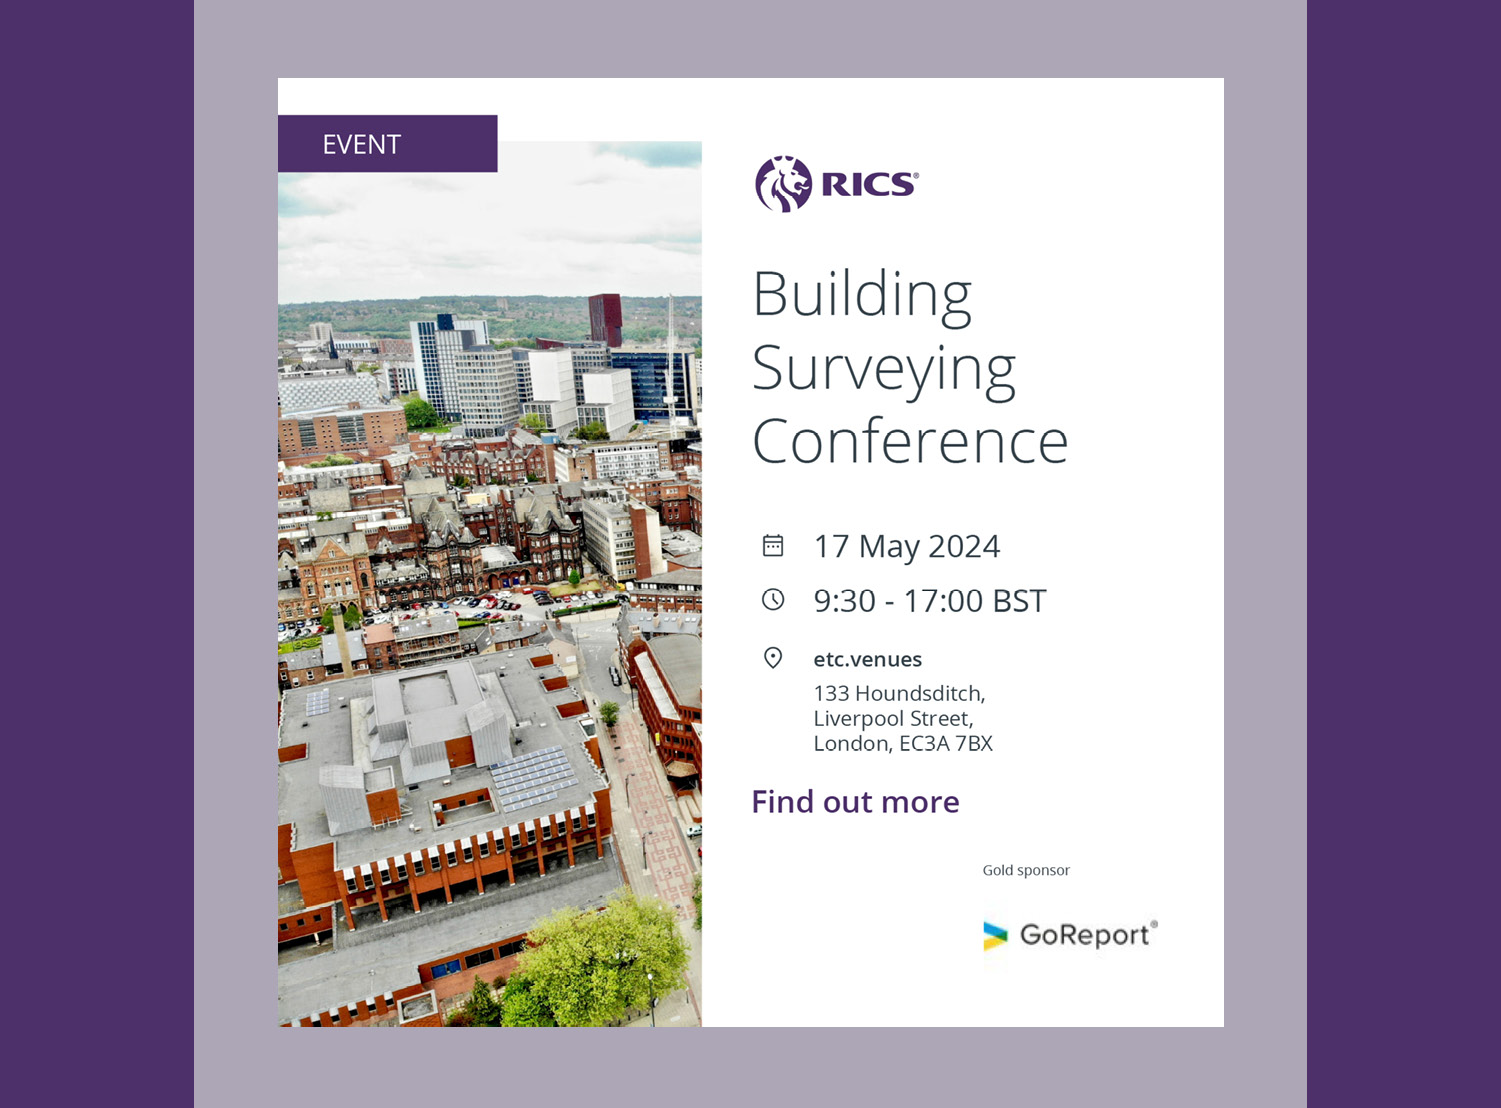 RICS Building Surveying Conference 2024: Embracing Innovation and Standards in Surveying